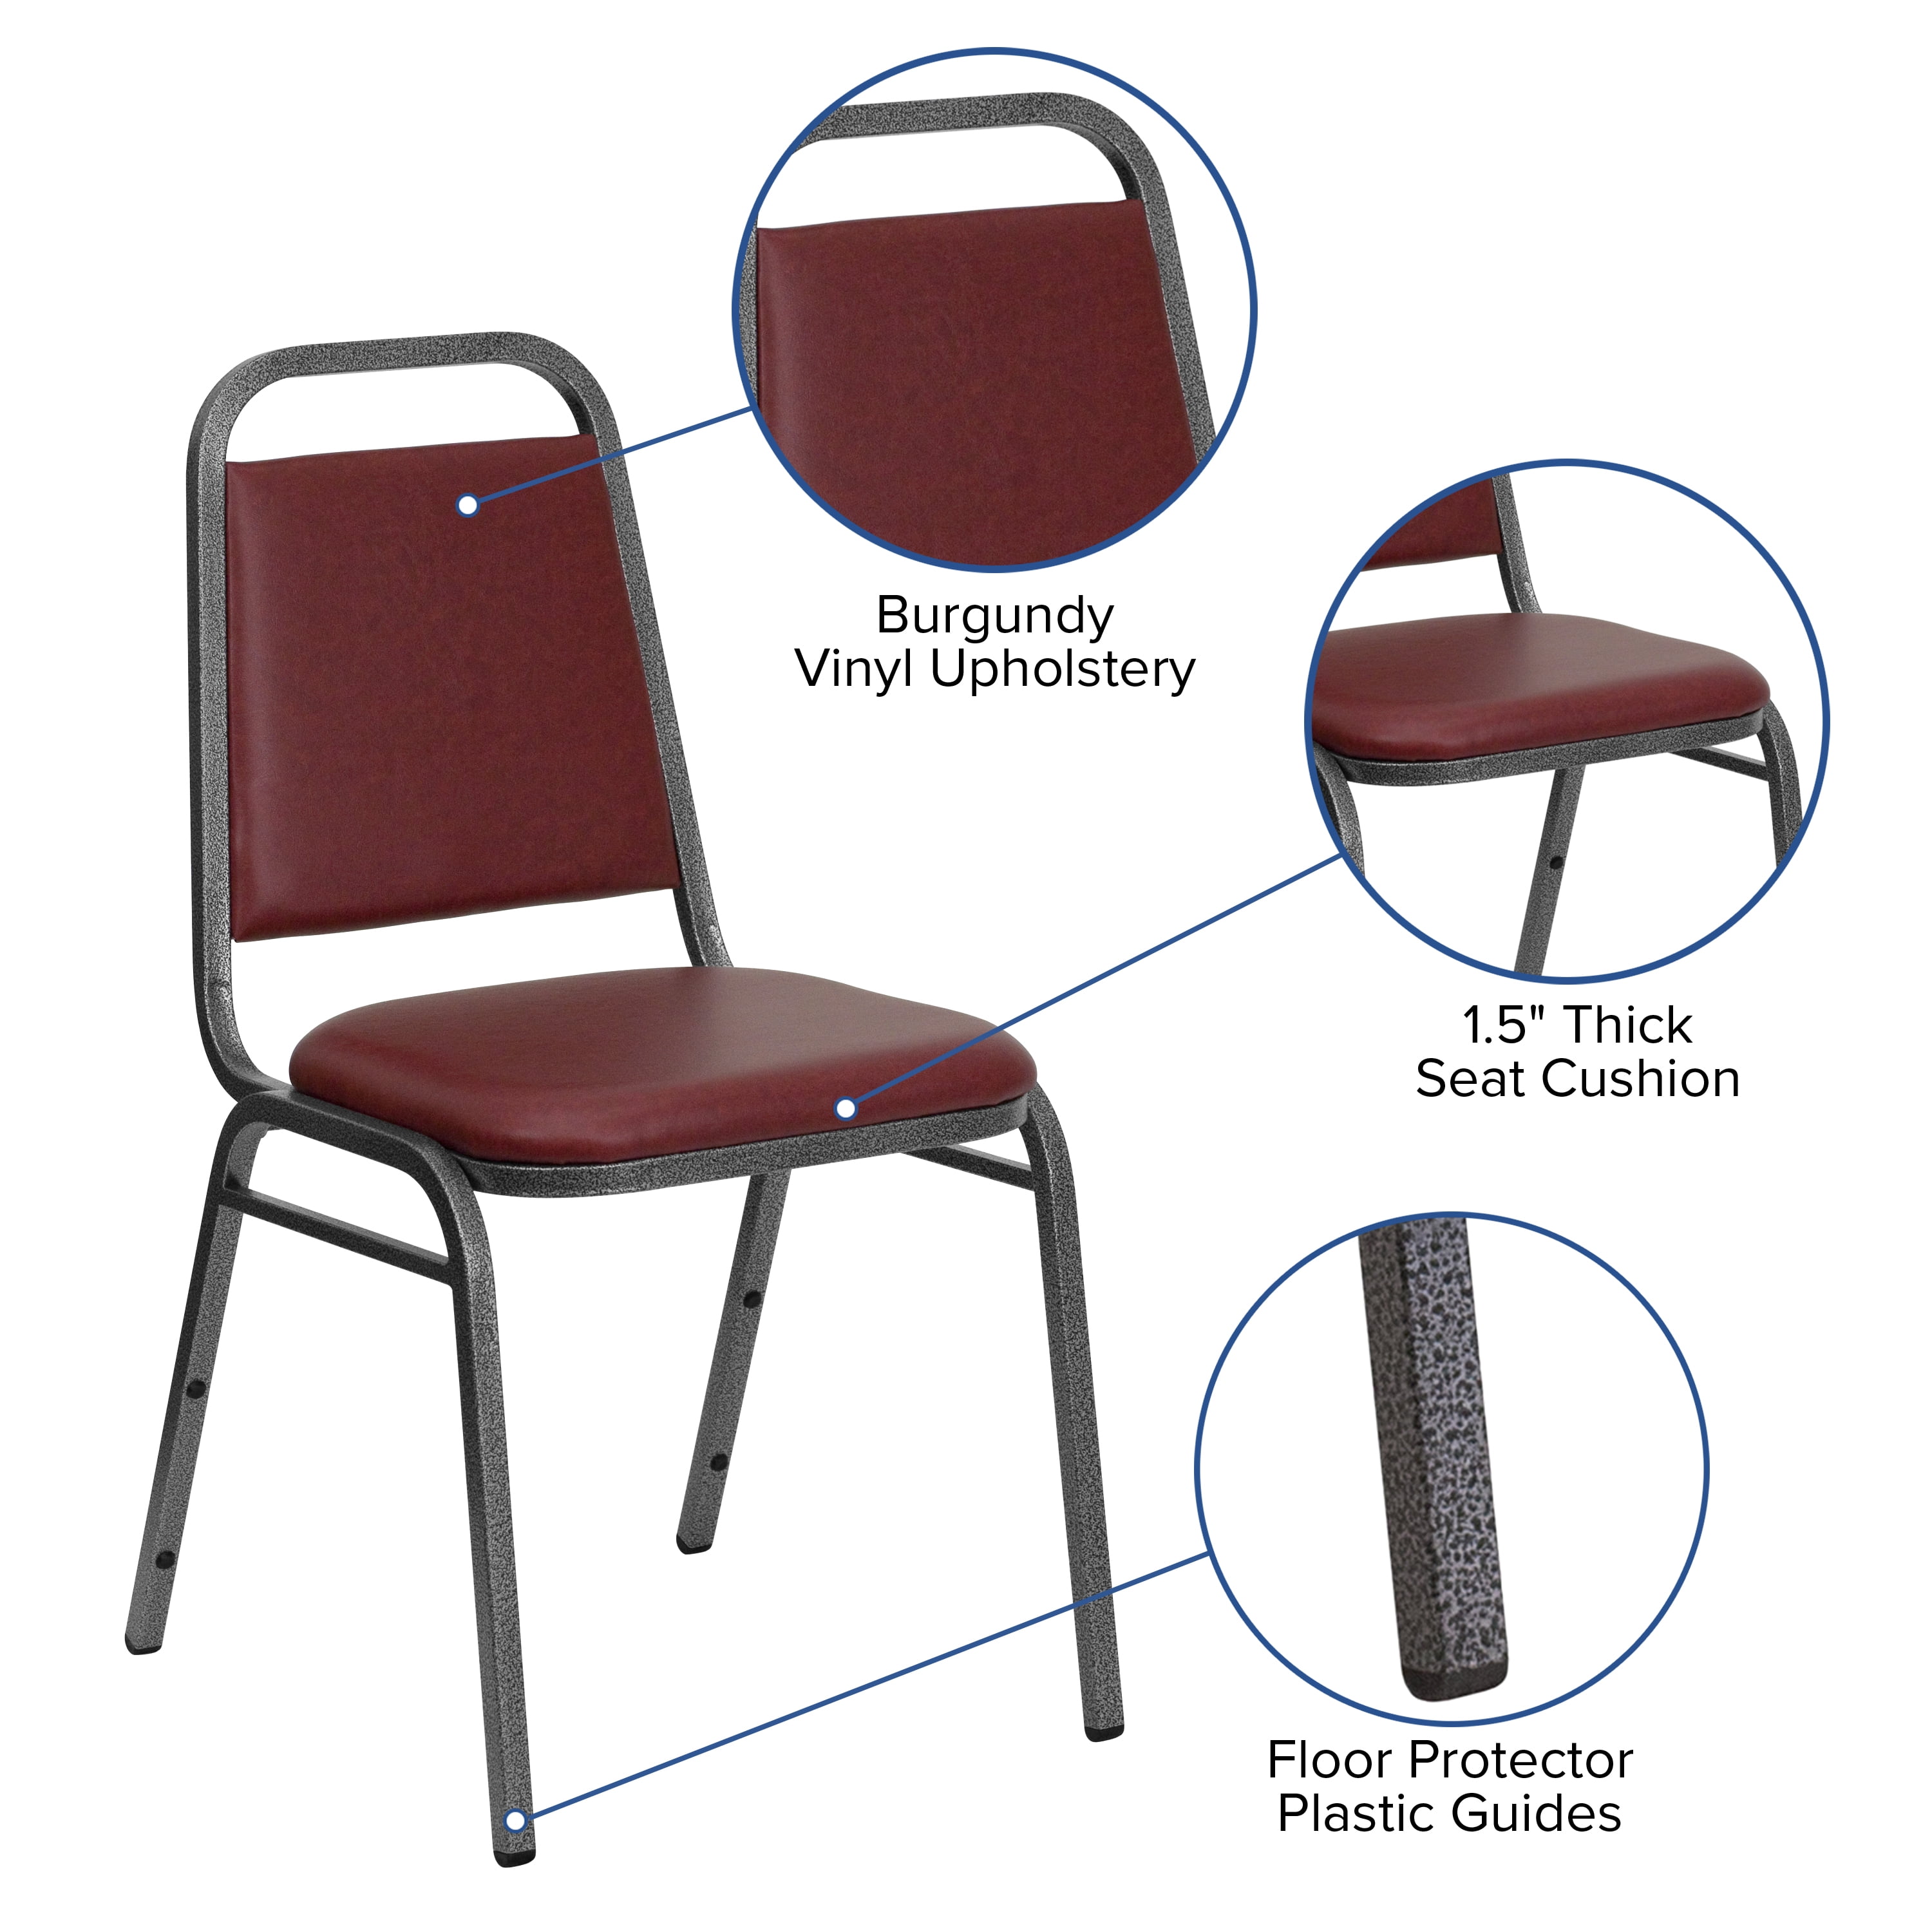 OEF Furnishings Vinyl Upholstered Stack Banquet Chair Burgundy 